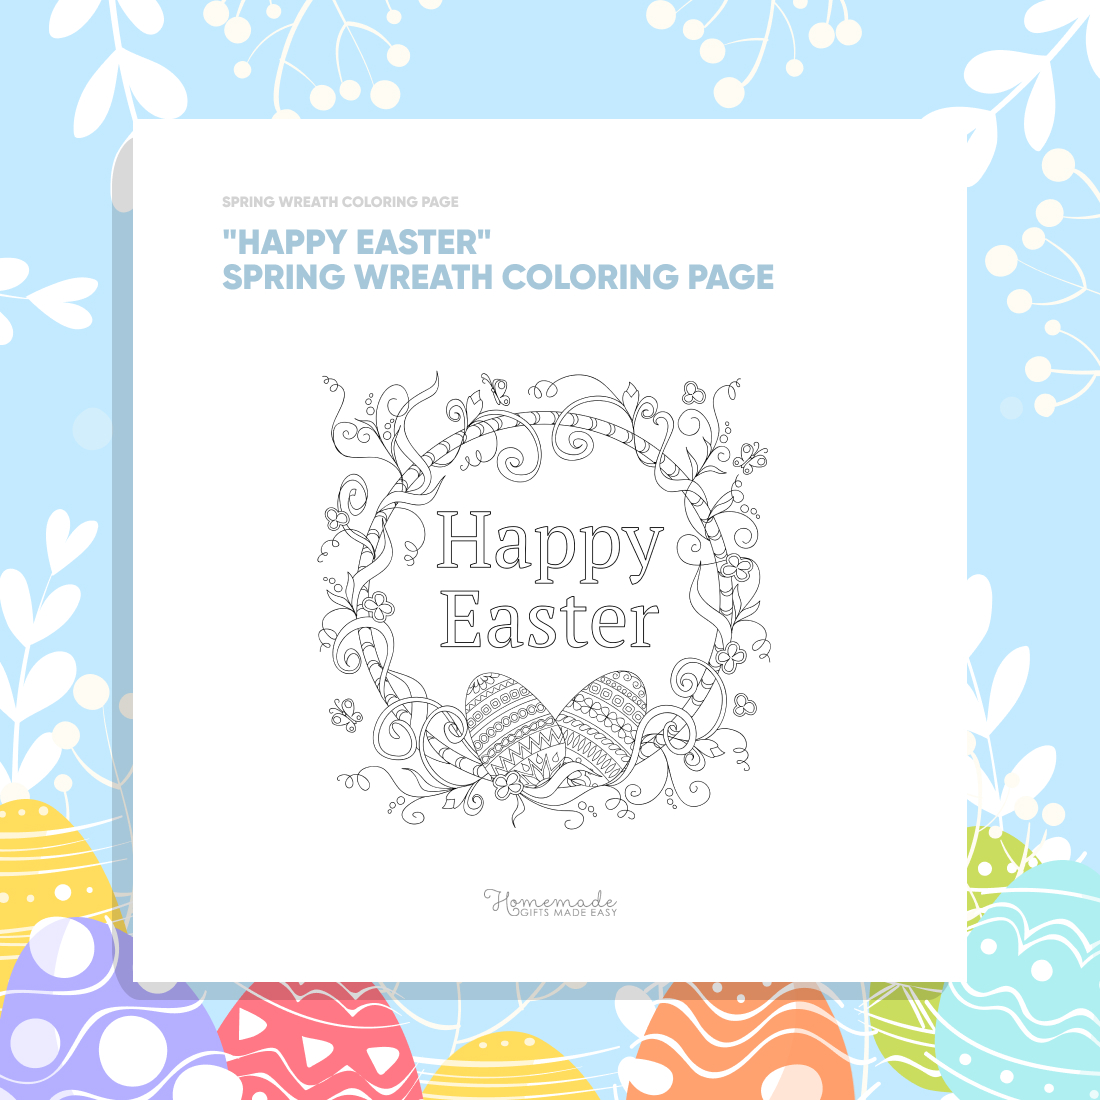 "Happy Easter" Spring Wreath Coloring Page cover image.